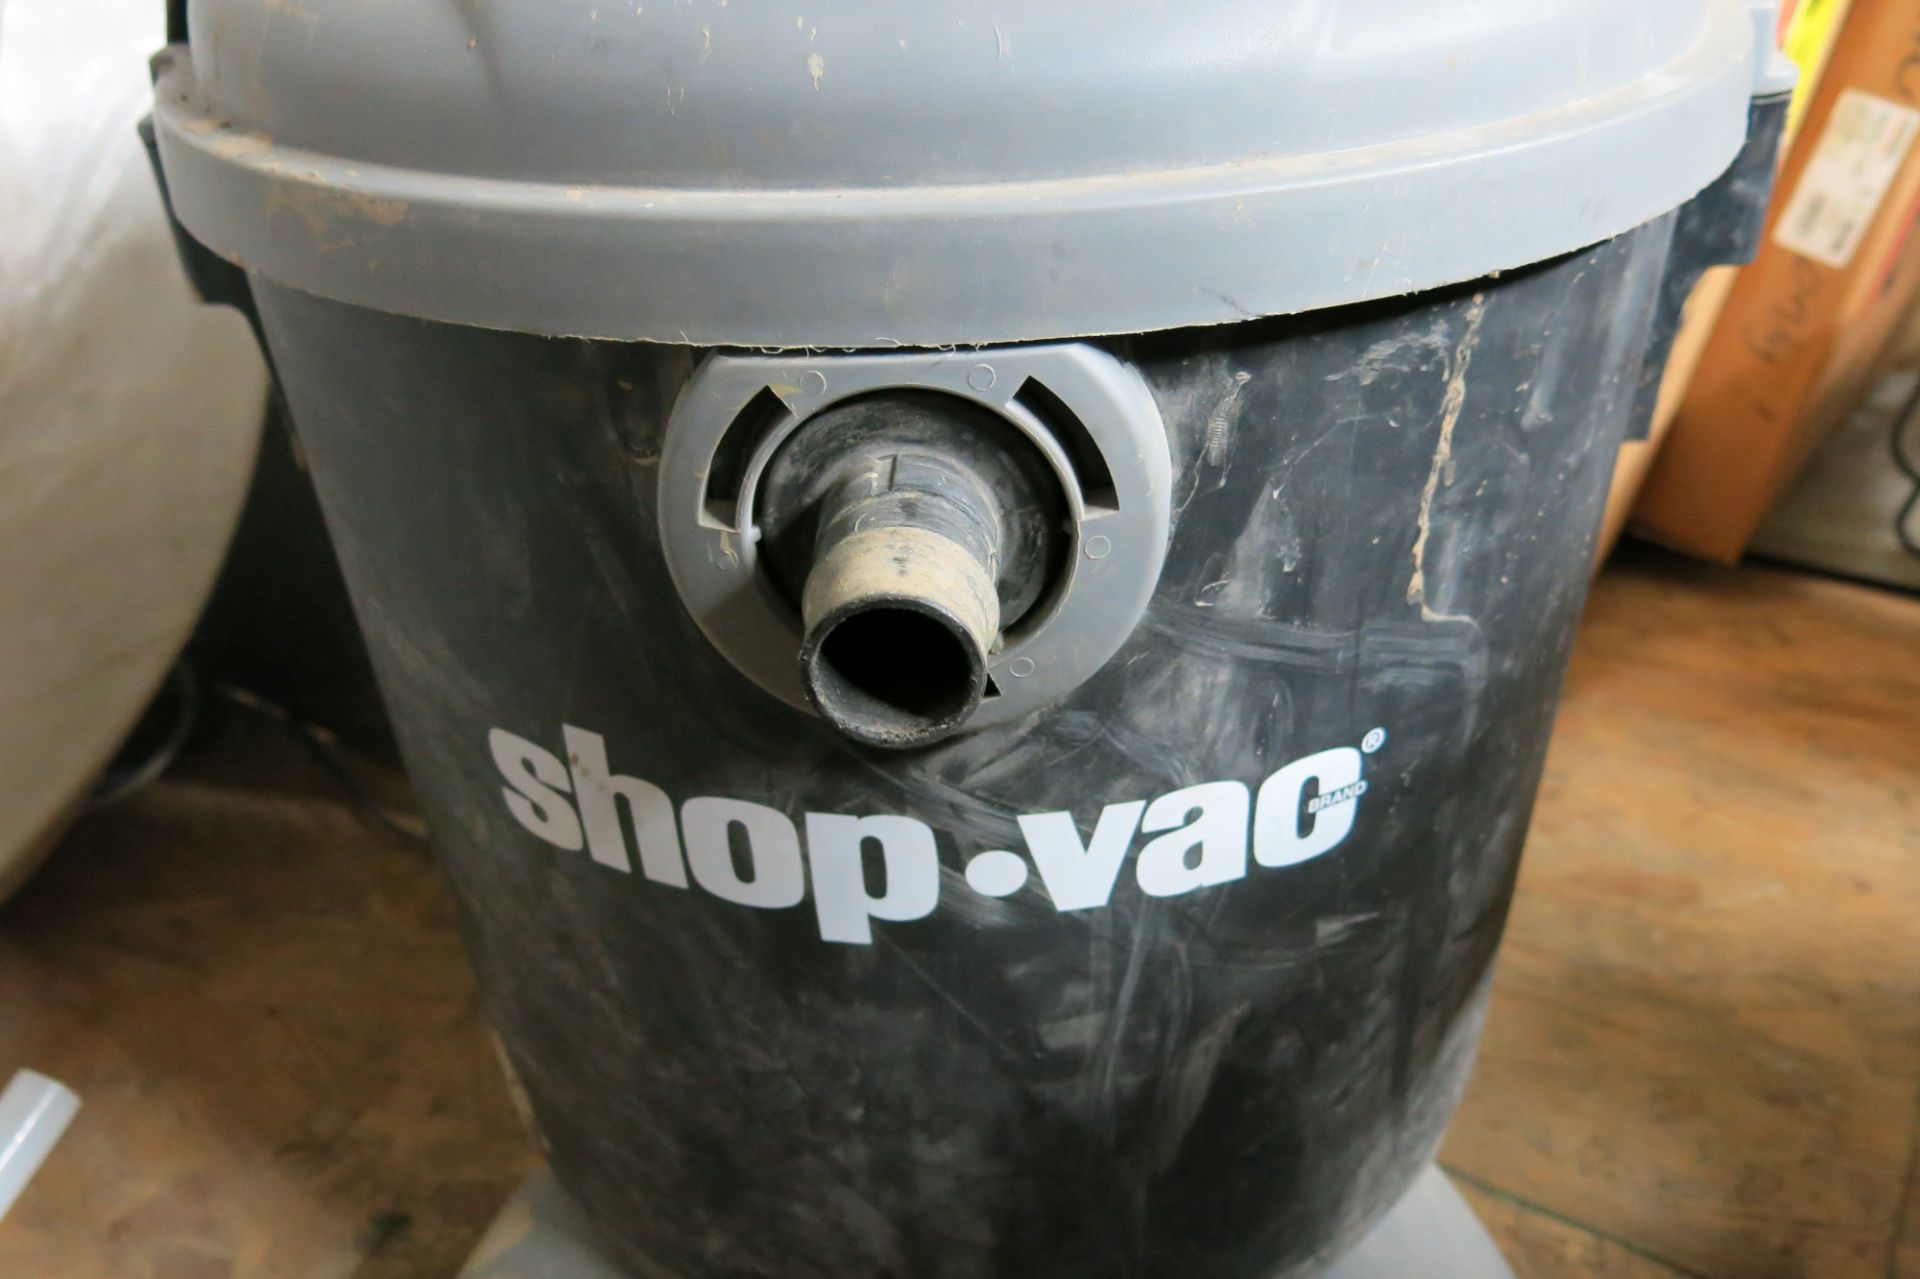 SHOP VAC, 14 GALLON, 4.5 HP, WET/DRY VAC (LOCATED IN MISSISSAUGA) - Image 2 of 3